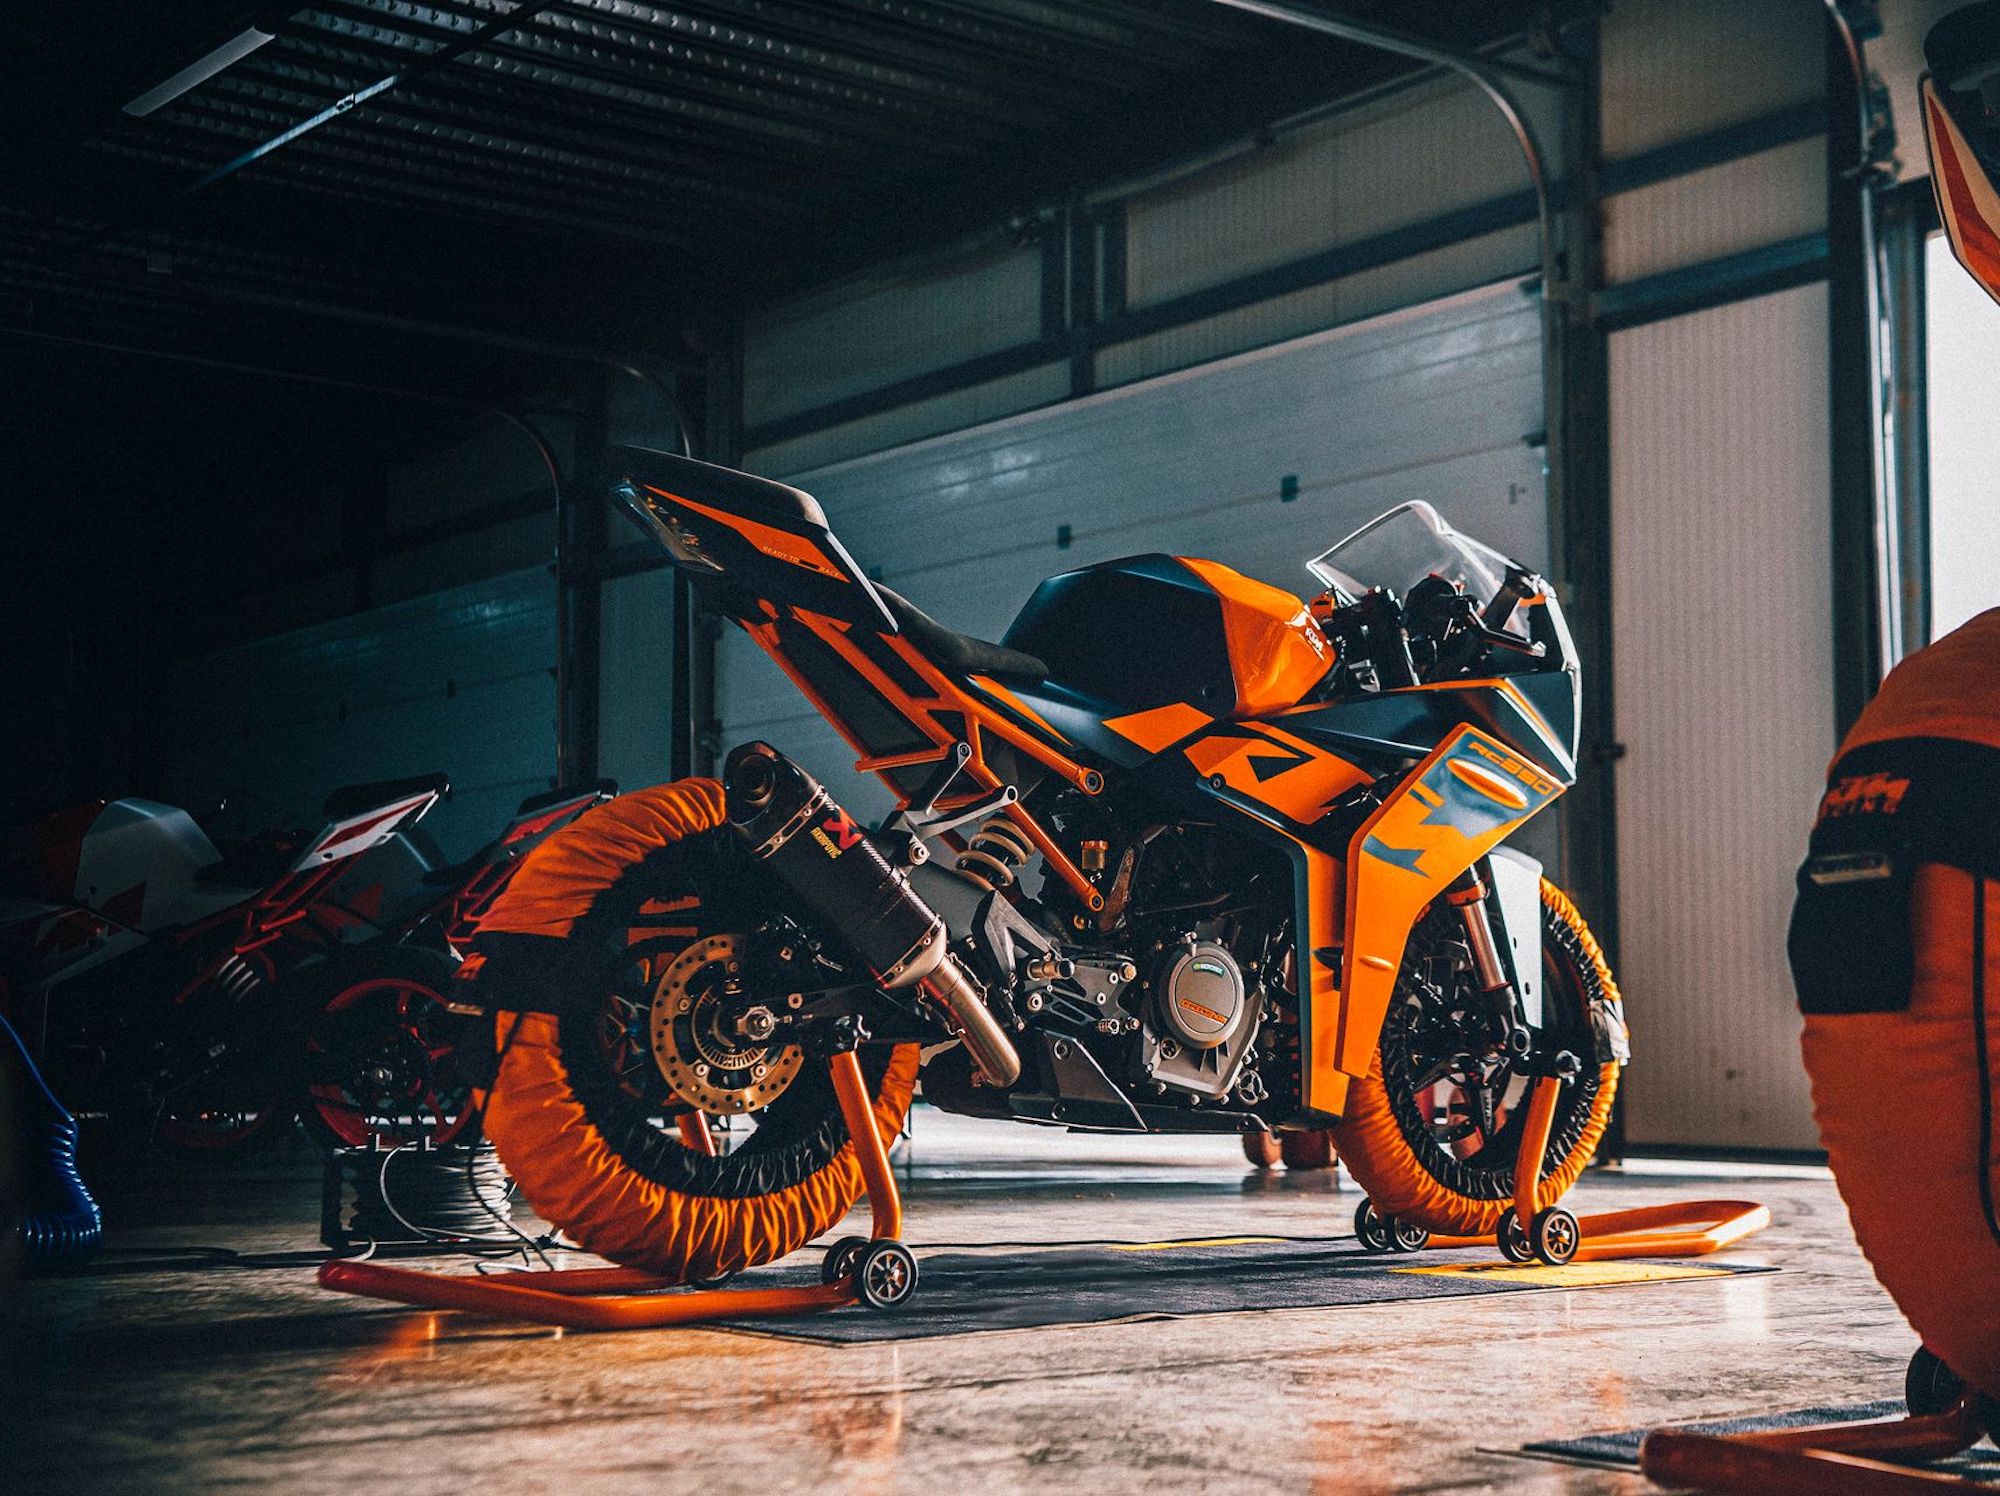 A view of KTM machines. Media sourced from KTM.